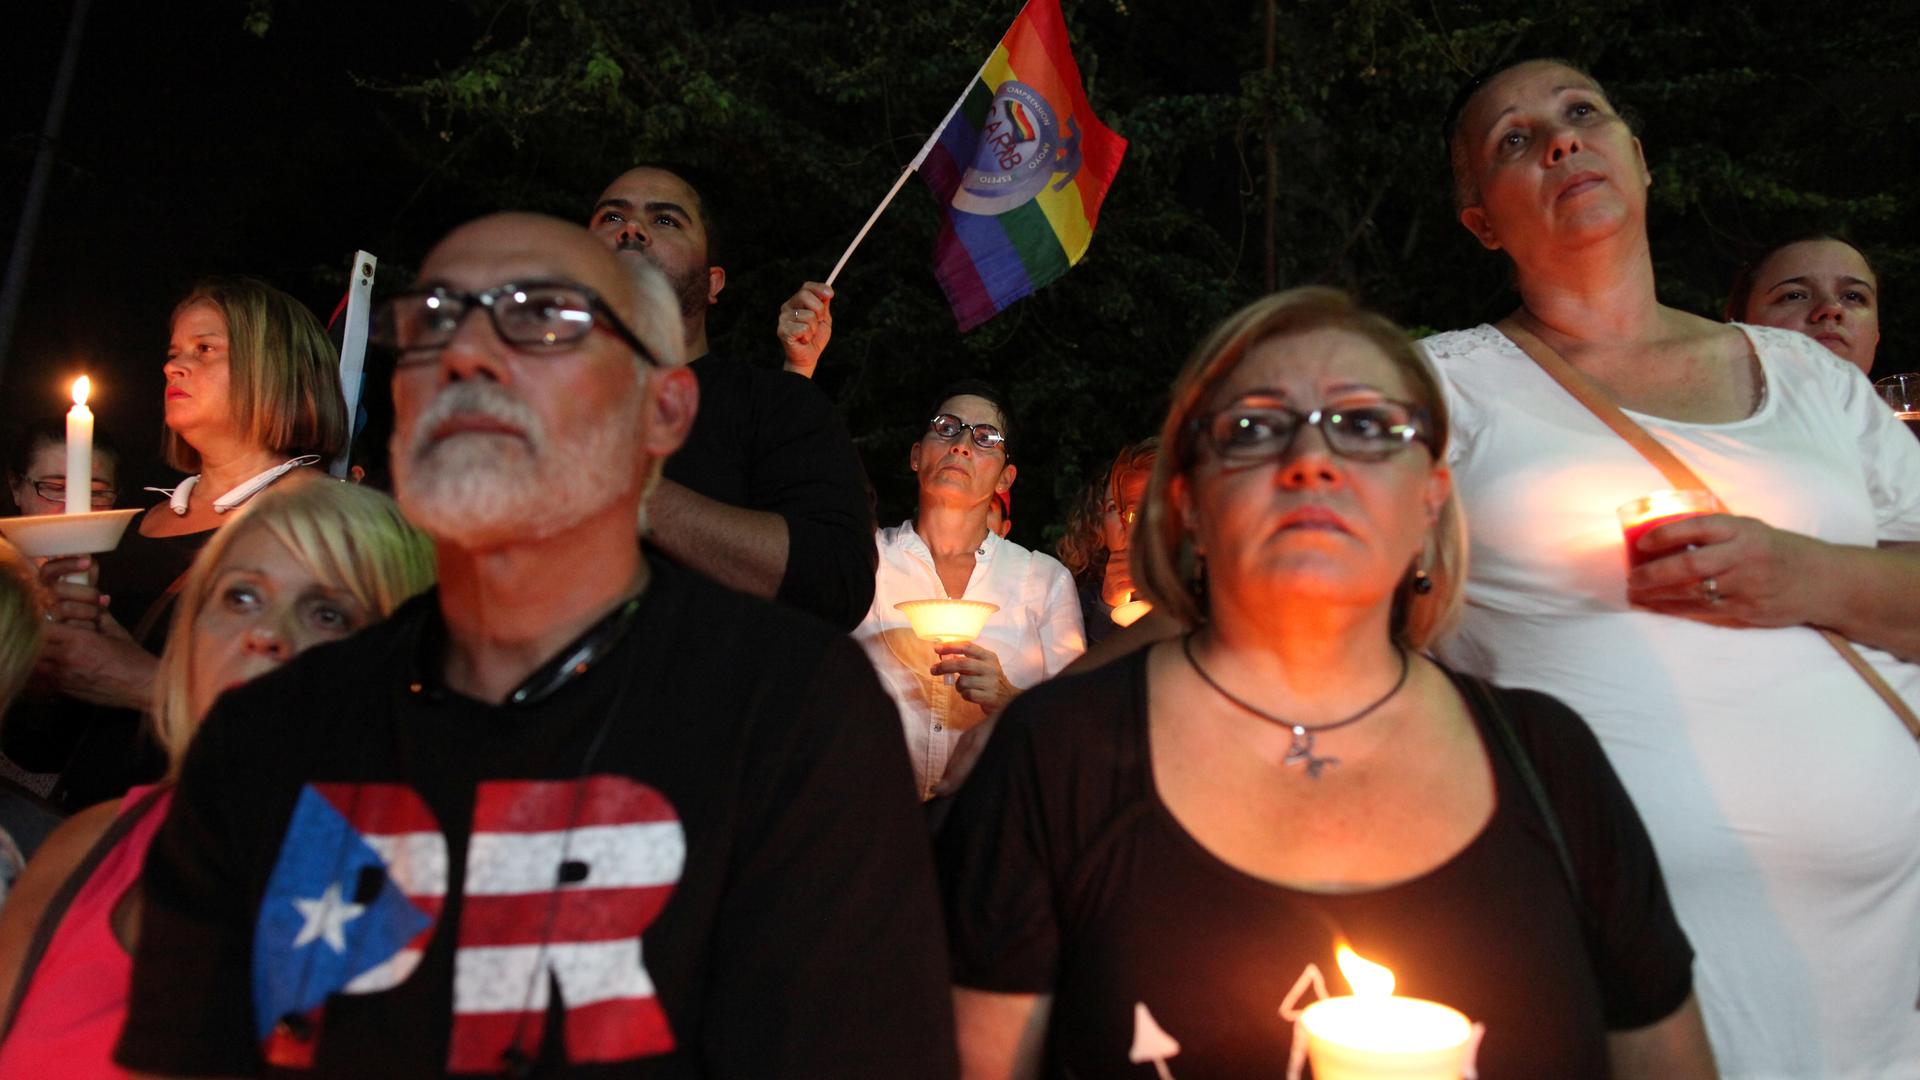 Puerto Ricans gather for a vigil in memory of the victims of the Pulse gay nightclub shooting in Orlando, in San Juan, Puerto Rico, June 14, 2016.